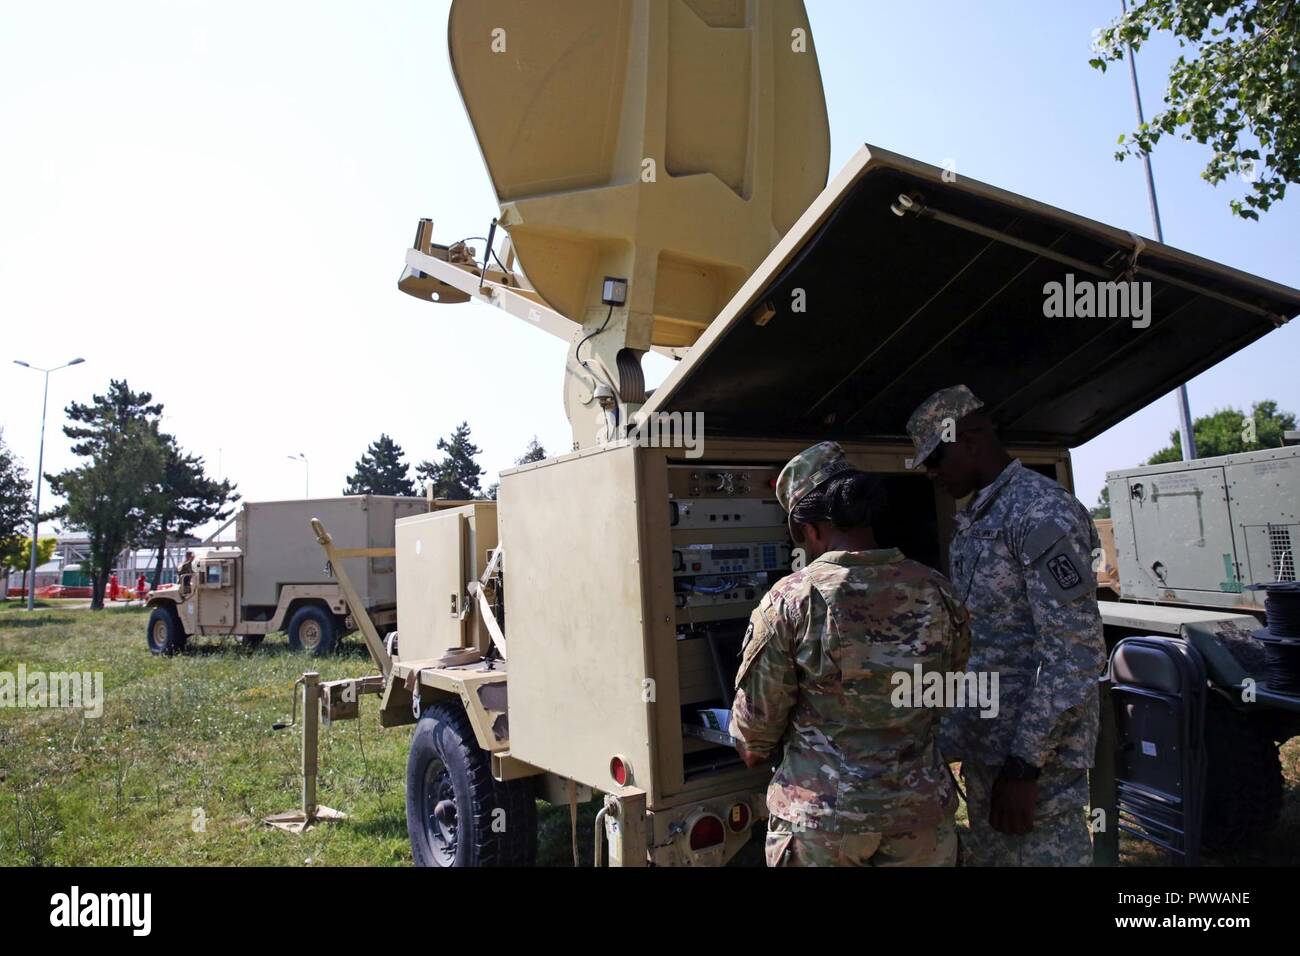 U.S. Army Spc. Kendra Smith and Spc. Antwan Campbell, both assigned to Charlie Company, 86th Expeditionary Signal Battalion, 11th Signal Brigade, work to establish a satellite link June 29, 2017 at Mihail Kogalniceanu Air Base, Romania. The 86th Expeditionary Signal Bn. from Fort Bliss, Texas is augmenting 2nd Theater Signal Brigade with additional tactical signal assets and capability for exercise Saber Guardian 17, a U.S. Army Europe-led, multinational exercise, taking place in Bulgaria, Hungary and Romania July 11-20, 2017. Stock Photo